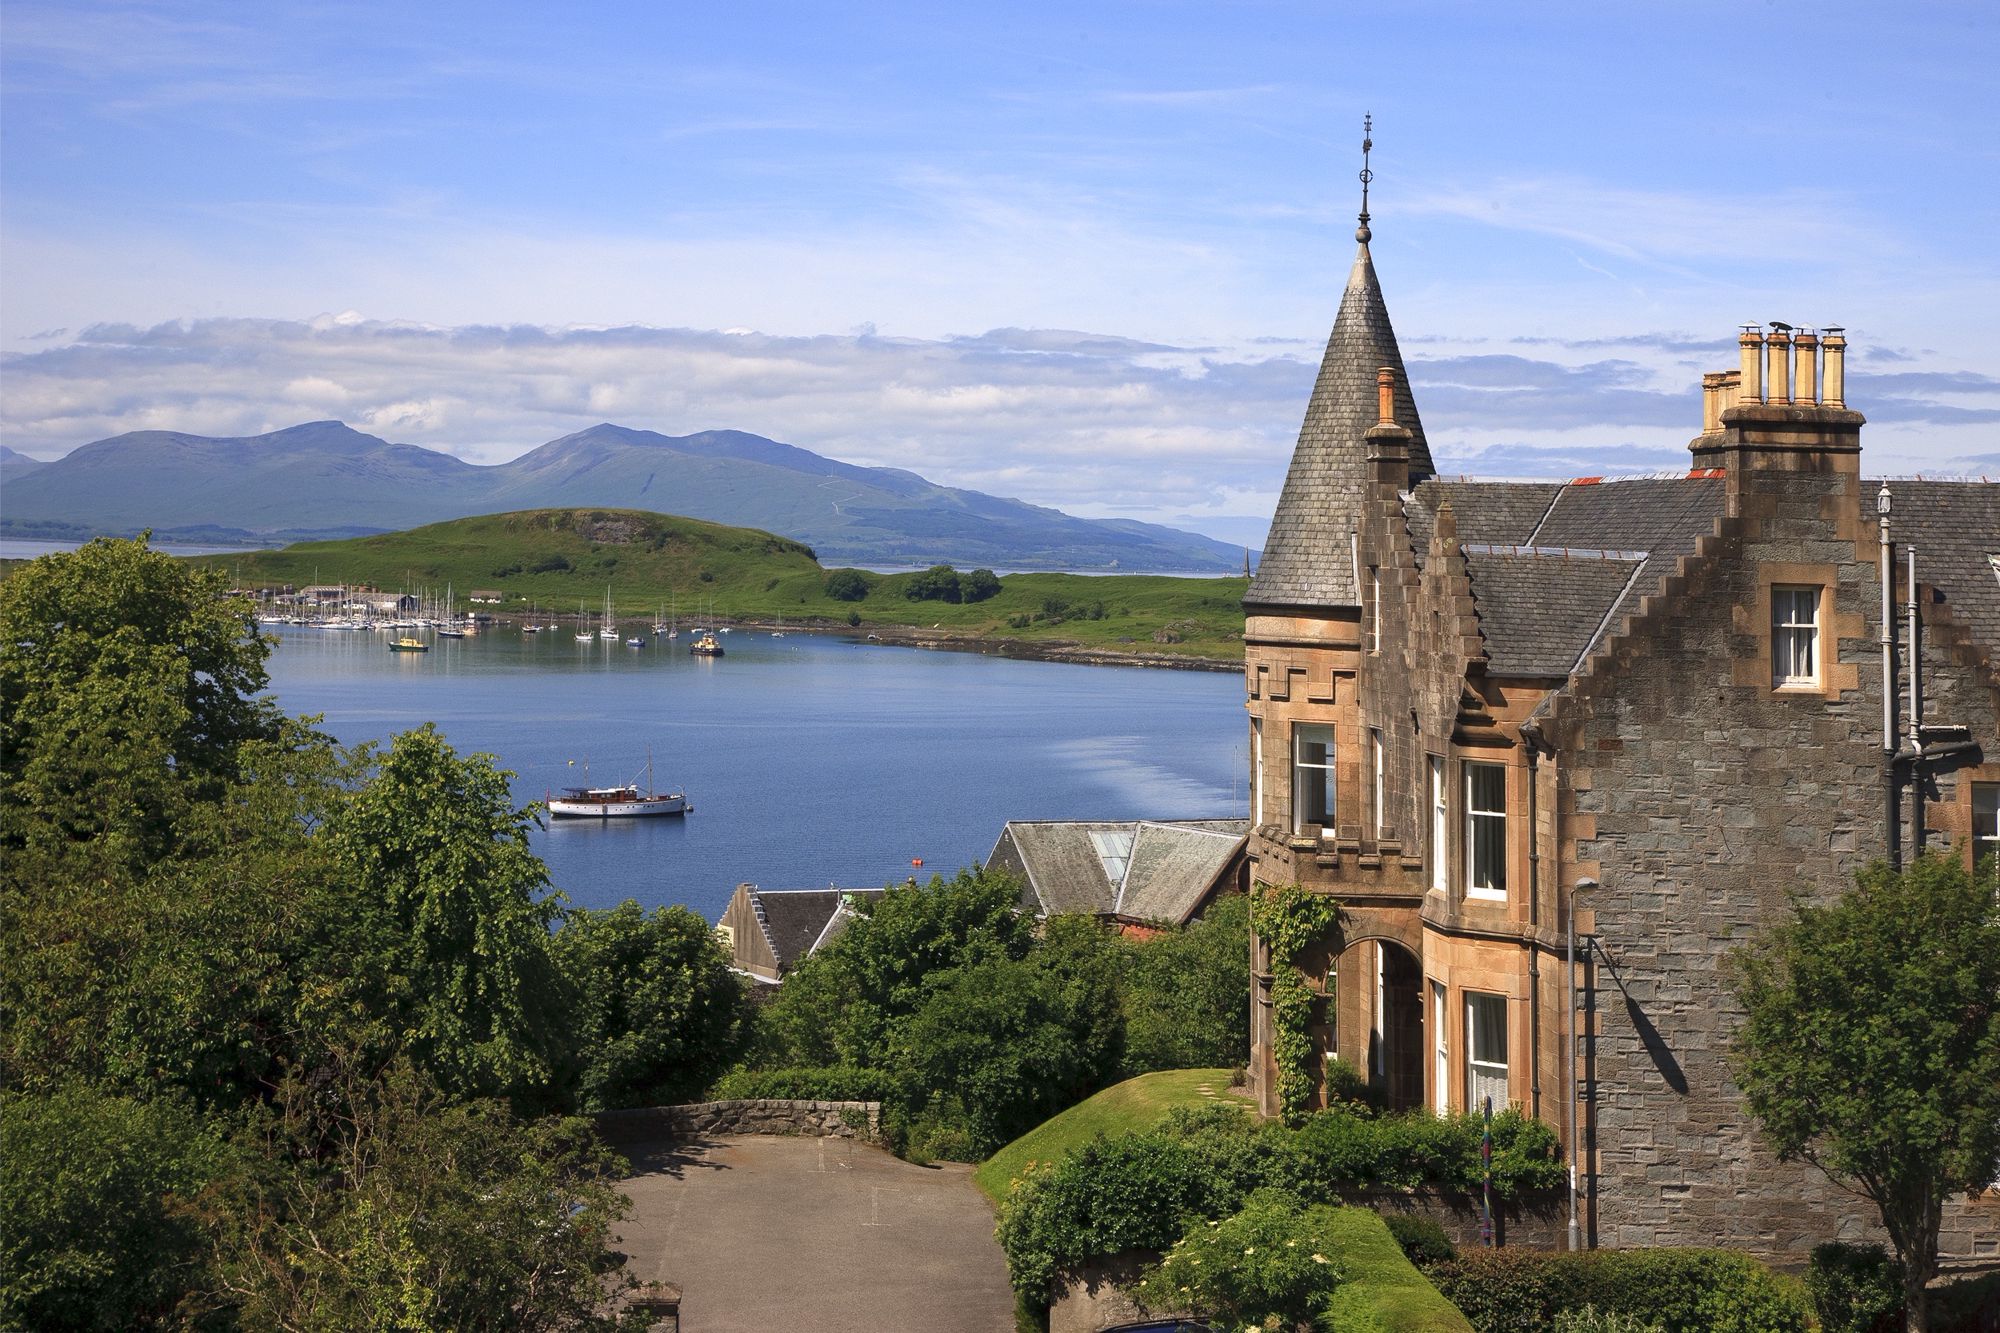 Hotels, Cottages, B&Bs & Glamping in Argyll & Bute